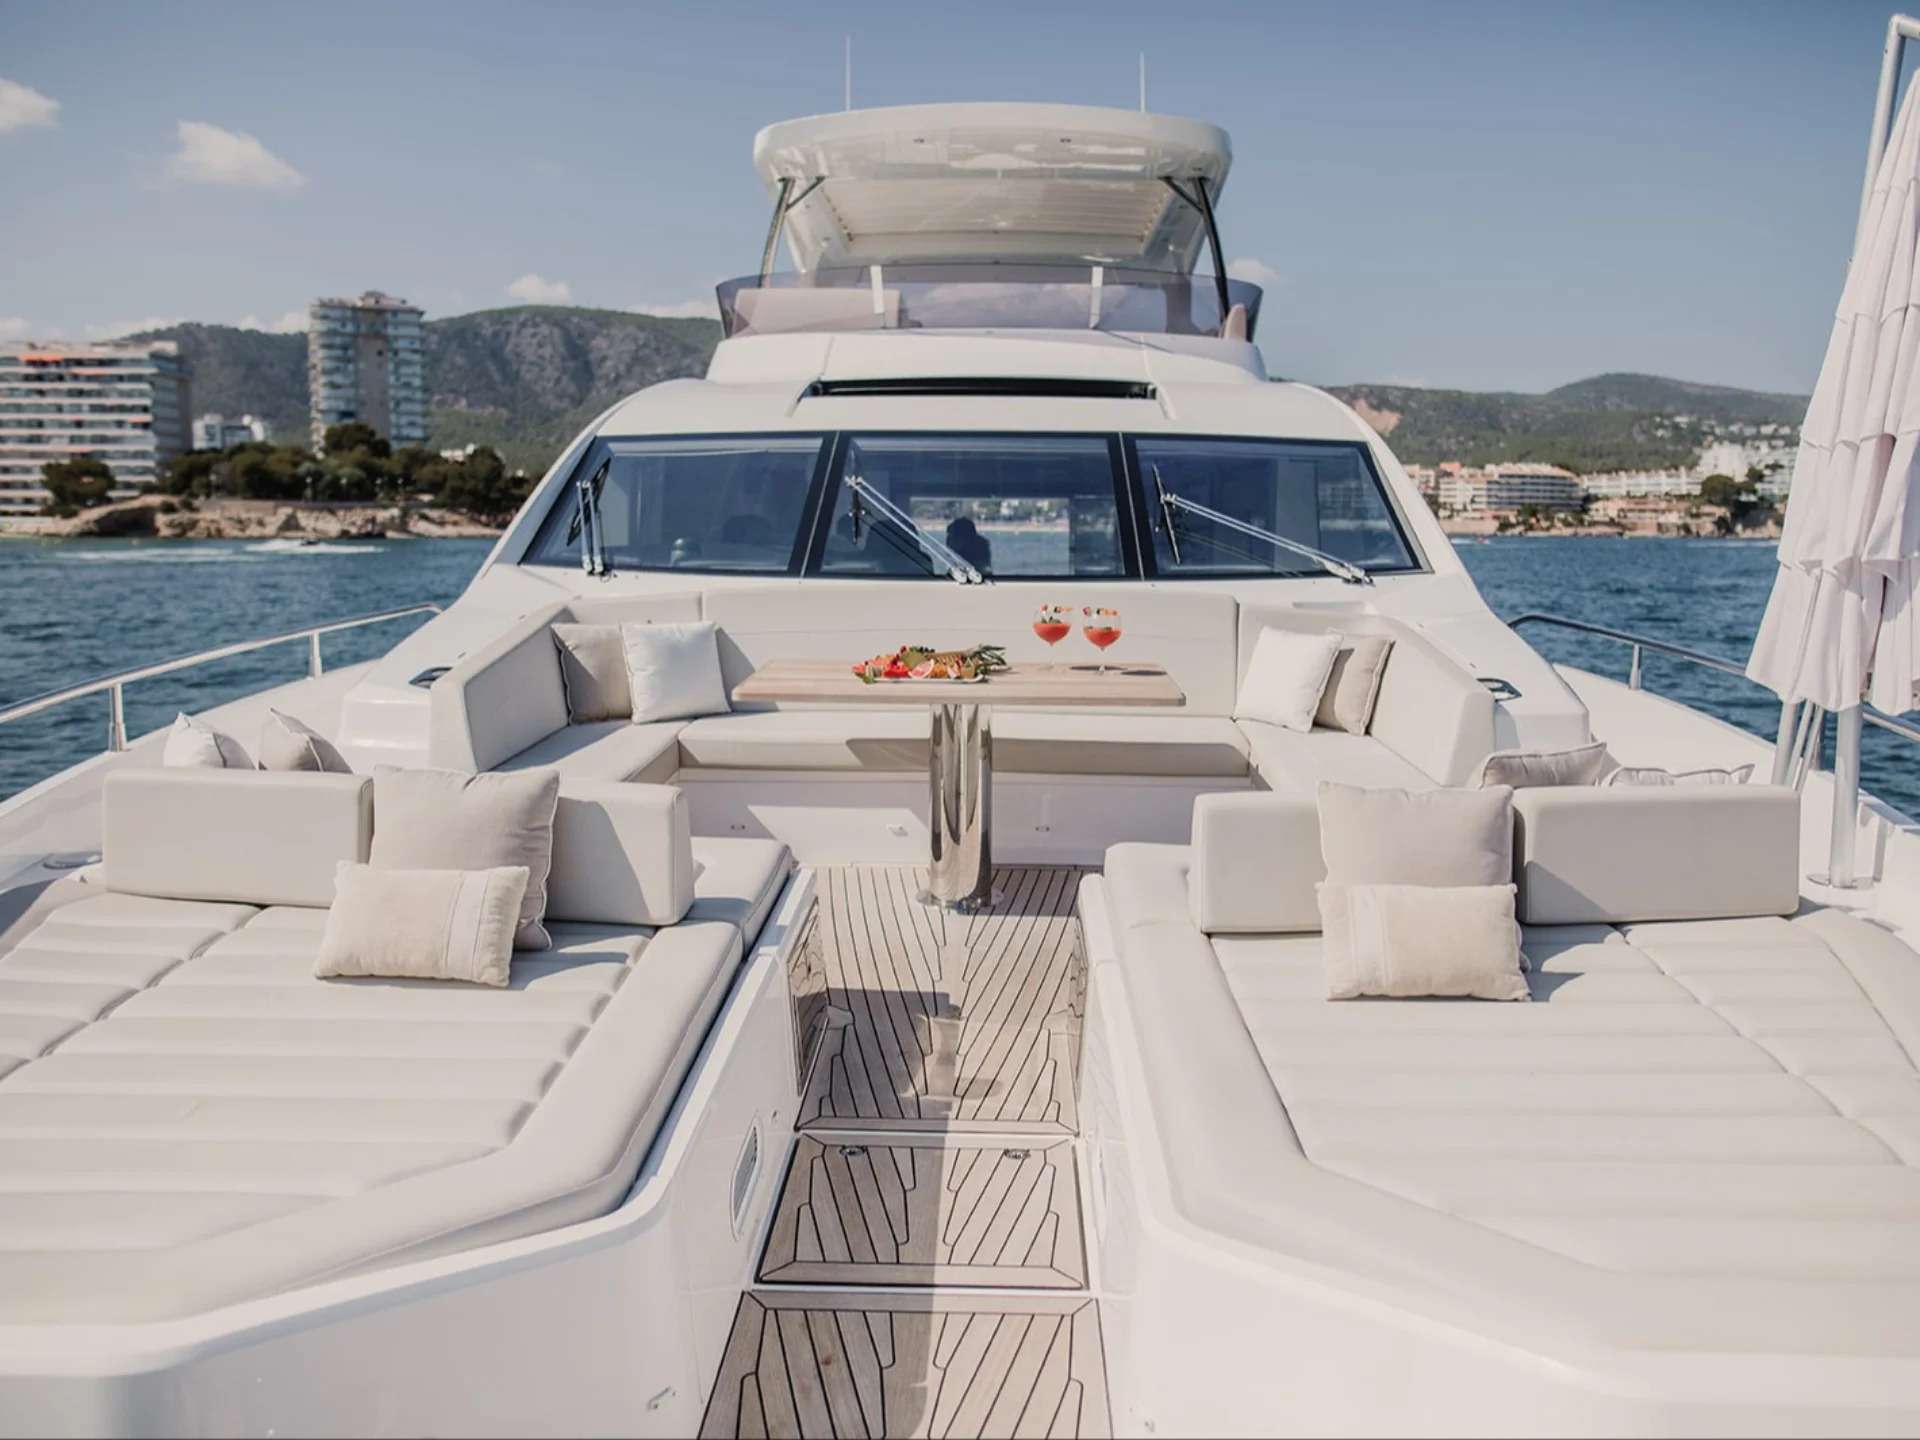 LADY M - Yacht Charter Roses & Boat hire in W. Med -Naples/Sicily, W. Med -Riviera/Cors/Sard., W. Med - Spain/Balearics 4